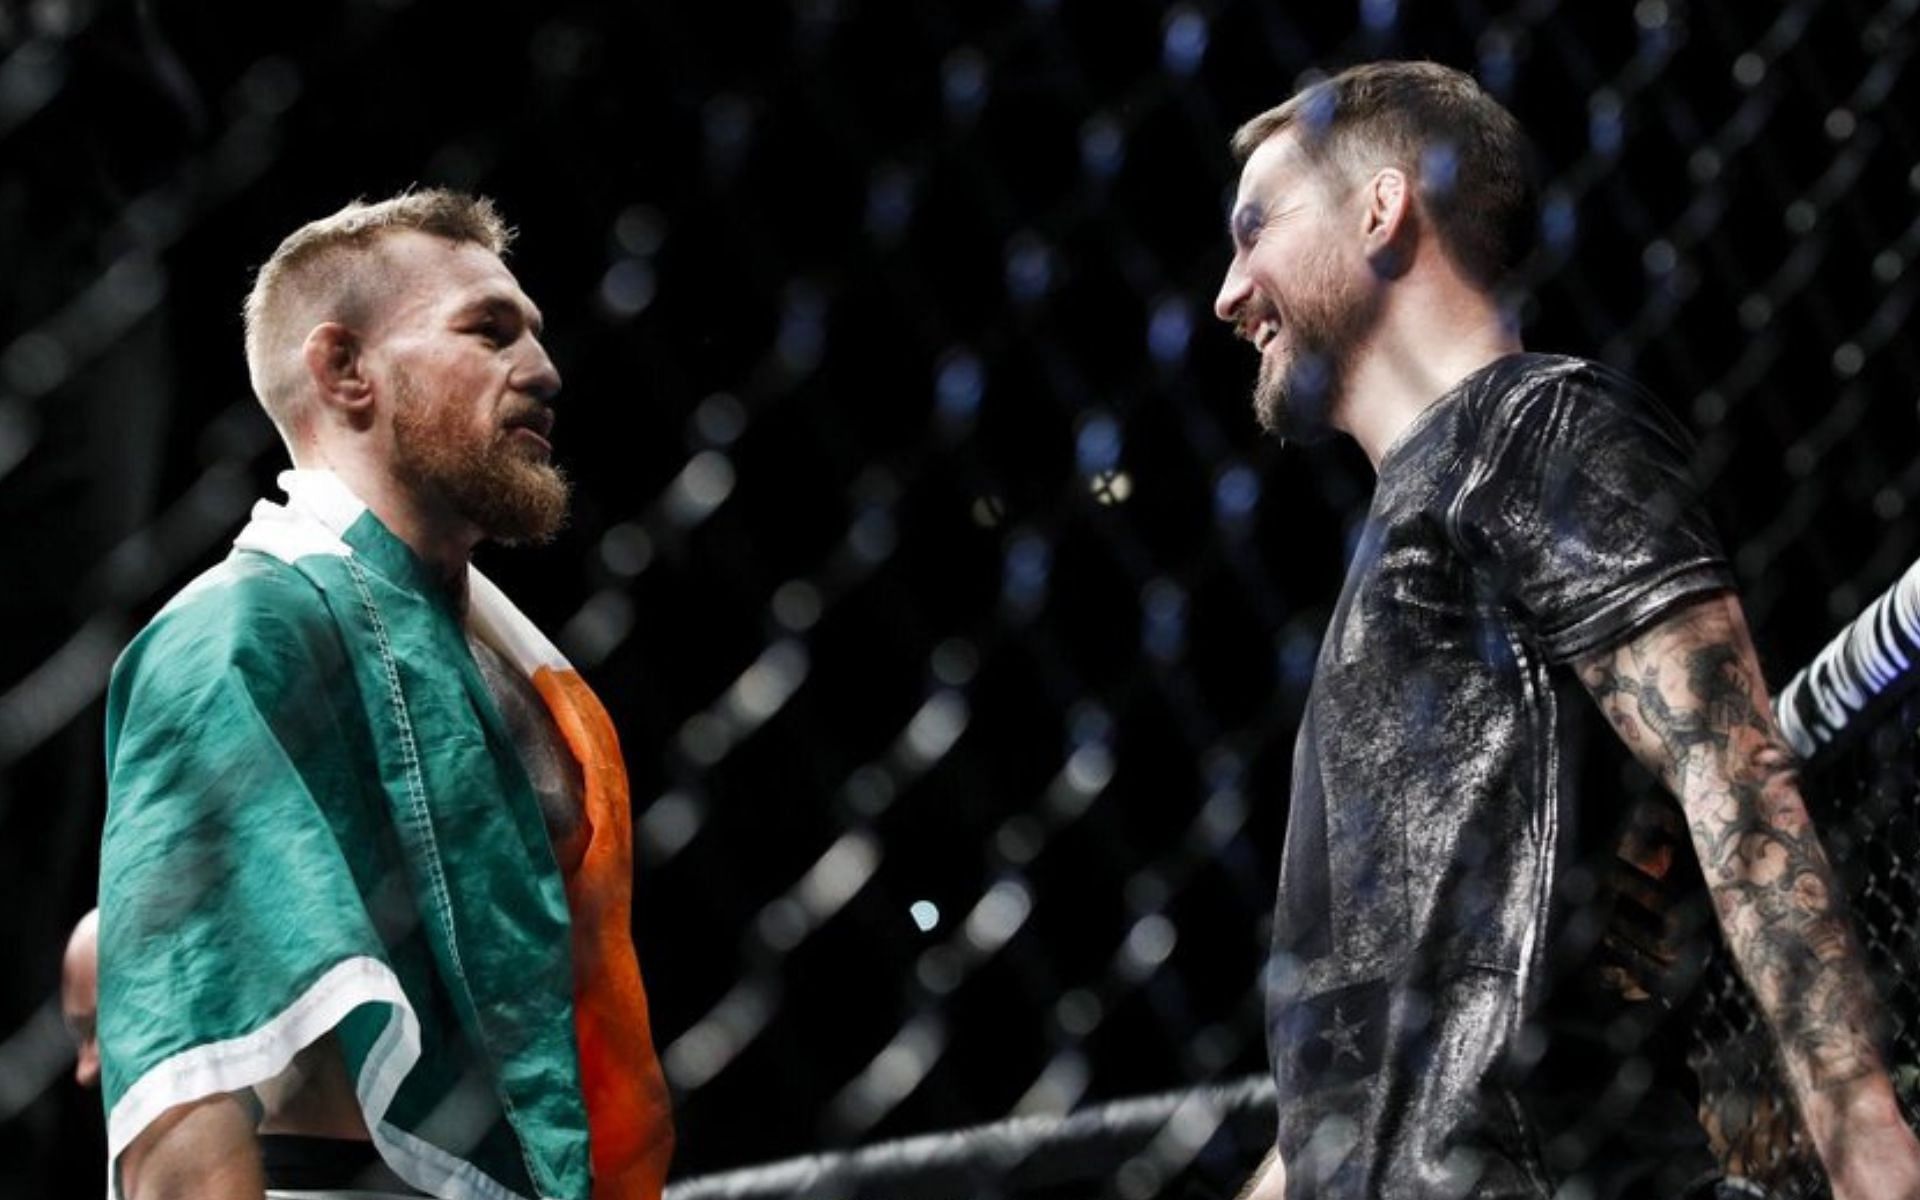 Conor McGregor (left) and John Kavanagh (right) (Image credits @MMAFighting on X)